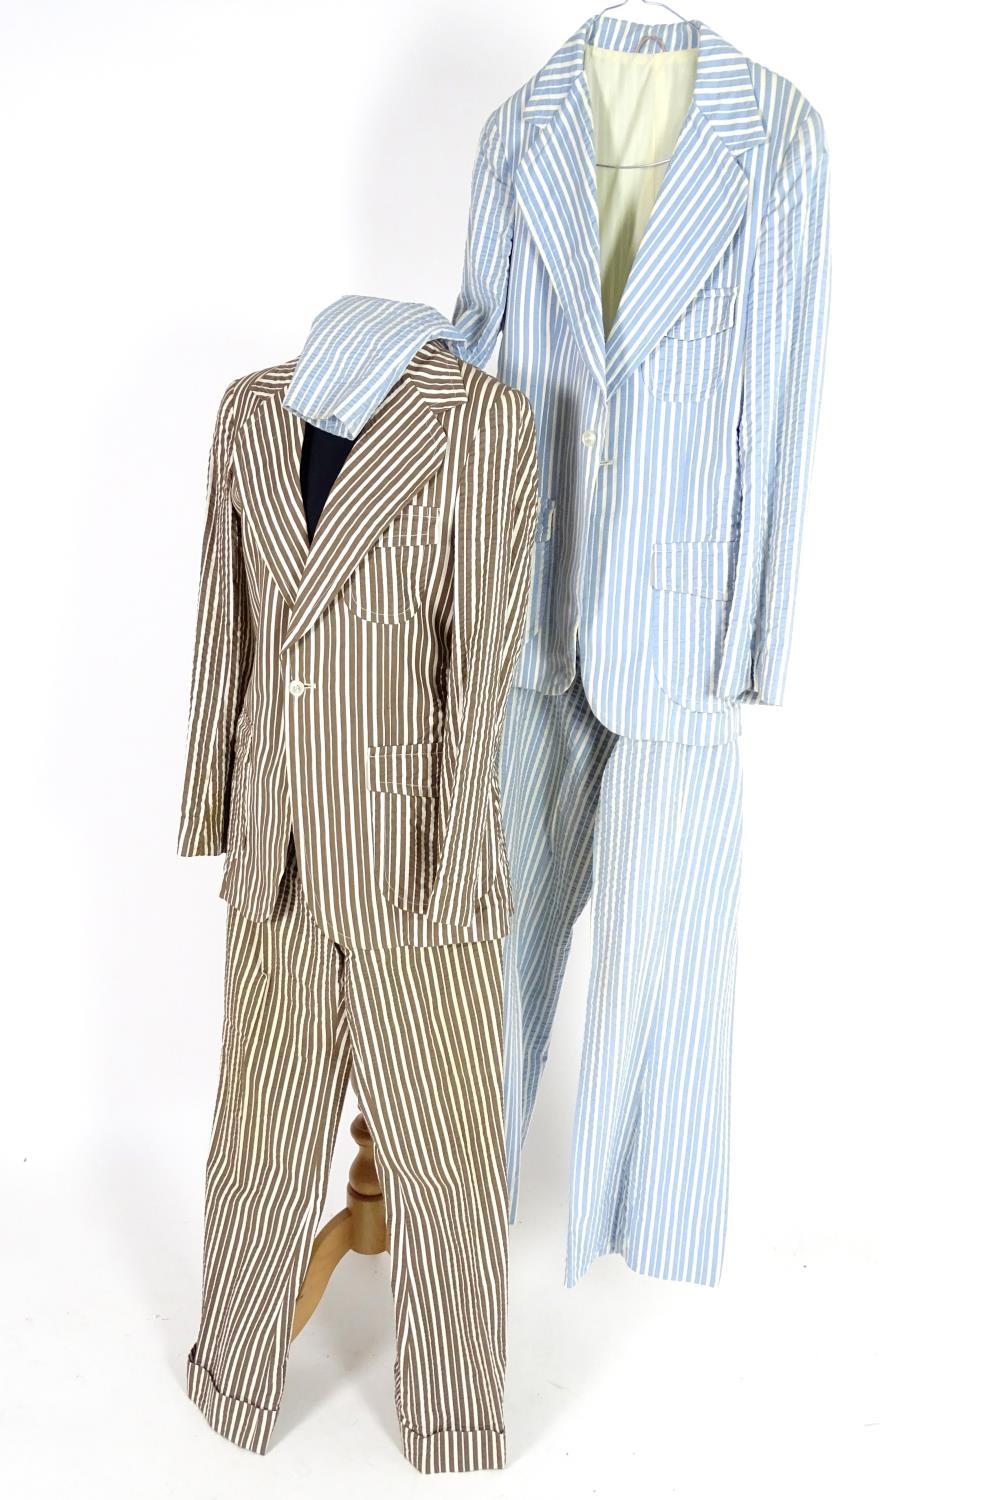 2 vintage stripy suits by Austins, a light brown and cream striped jacket and trousers along with - Image 4 of 10